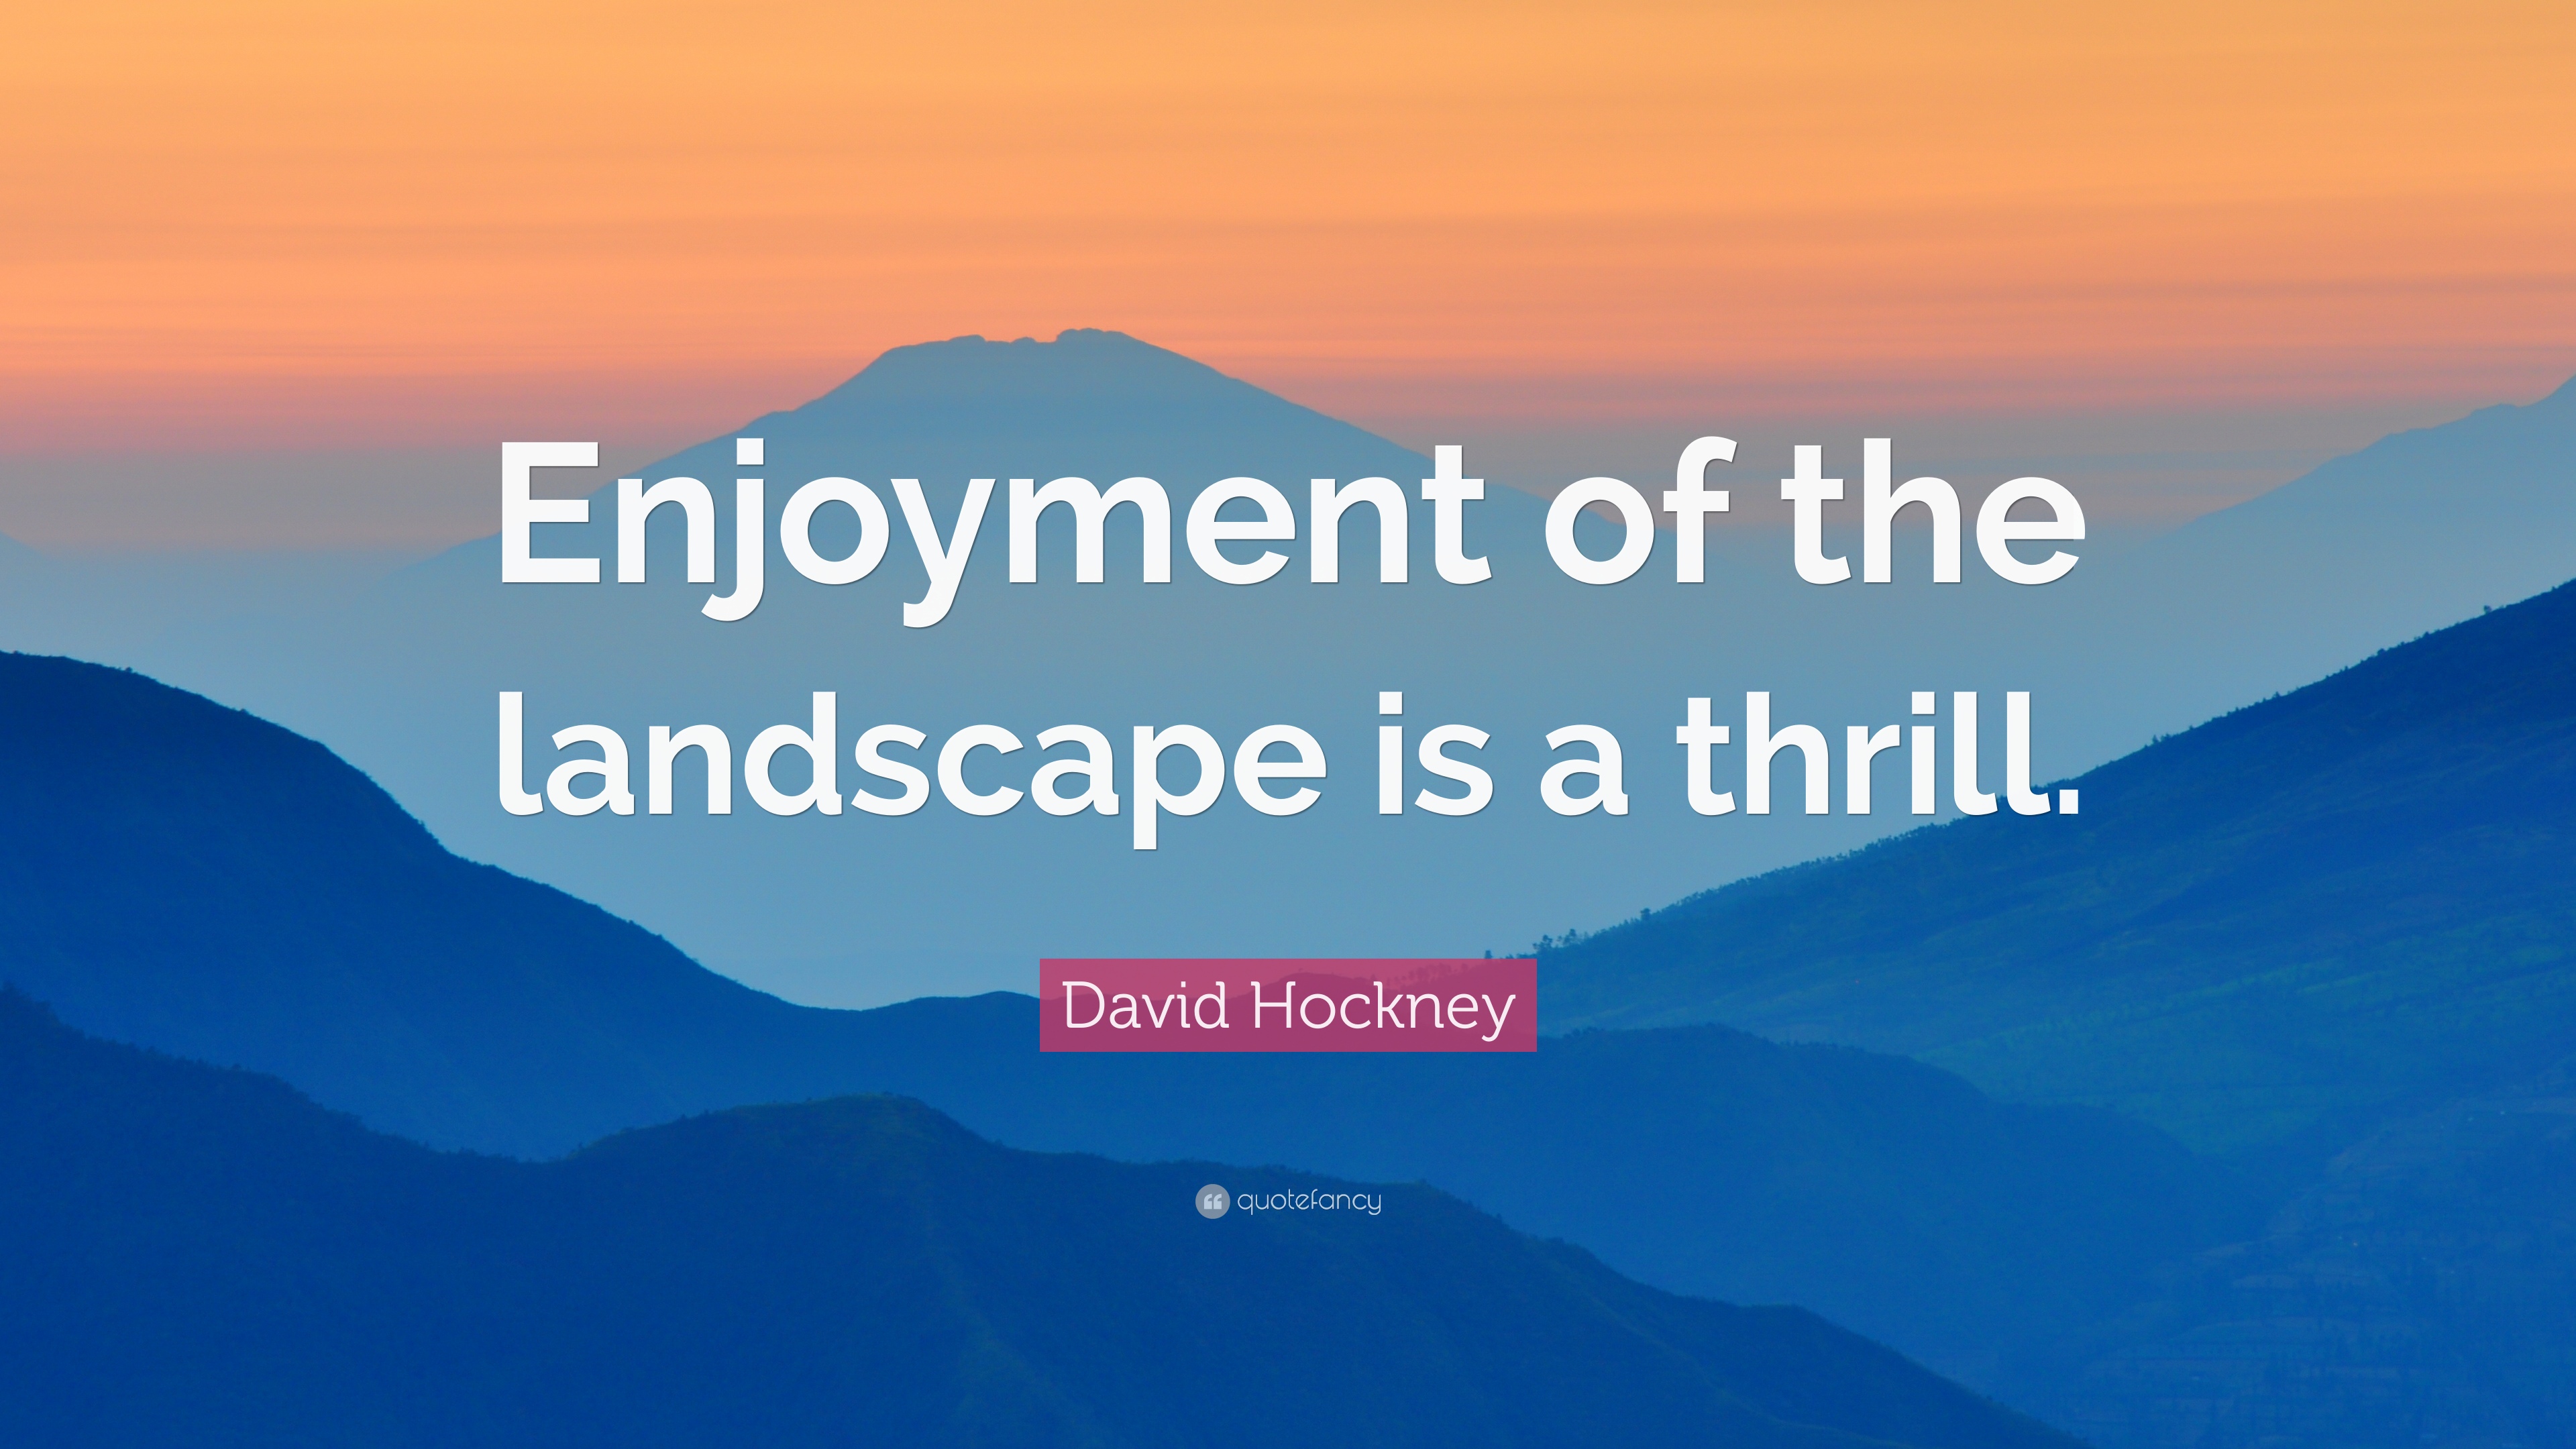 David Hockney Quote: “Enjoyment of the landscape is a thrill.” 7